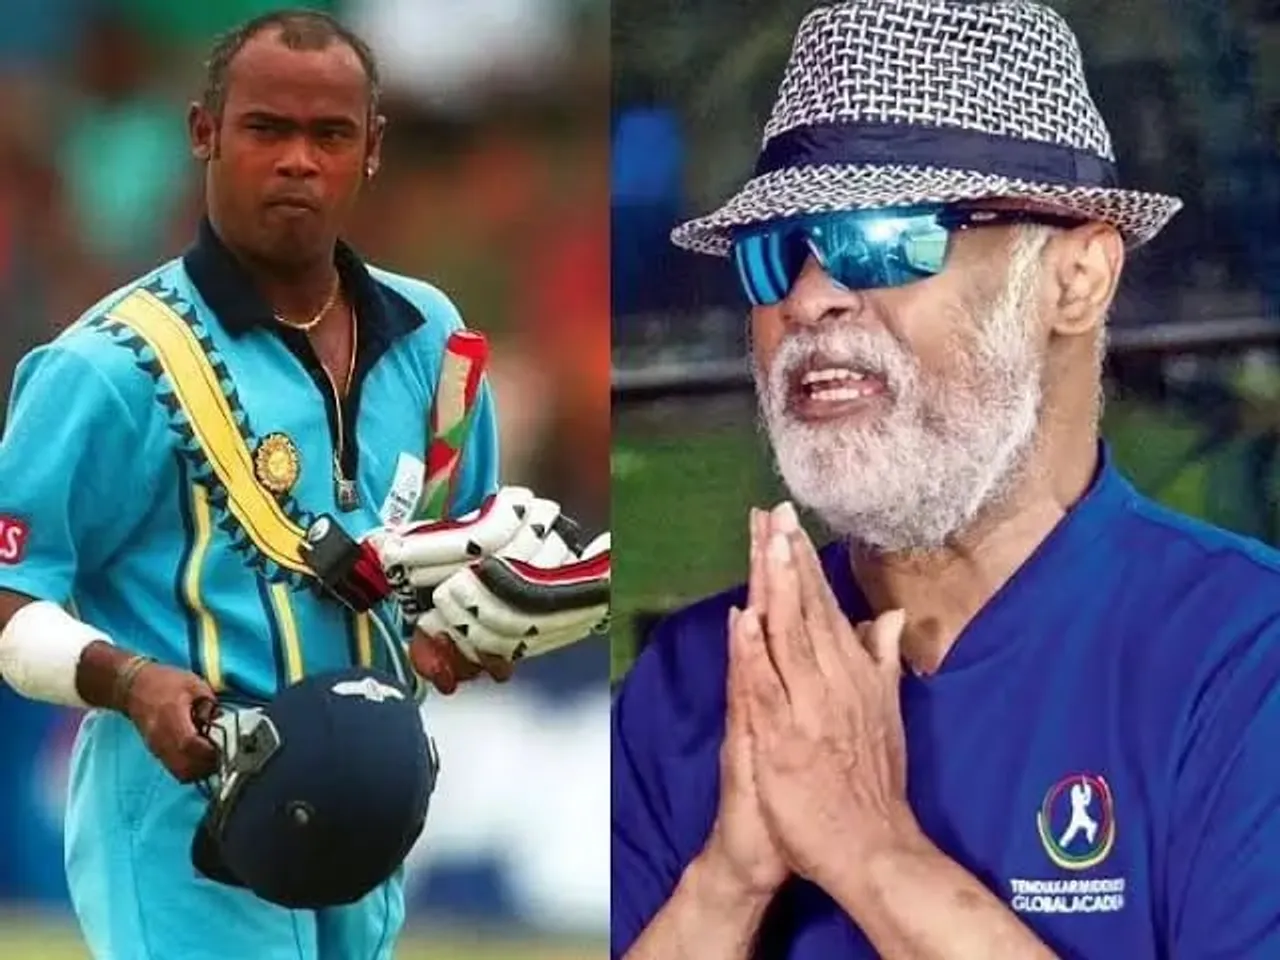 Once touted to be one of the most talented cricketers, Vinod Kambli now living on Rs 30,000 pension; wants to work in cricket | Sportz Point